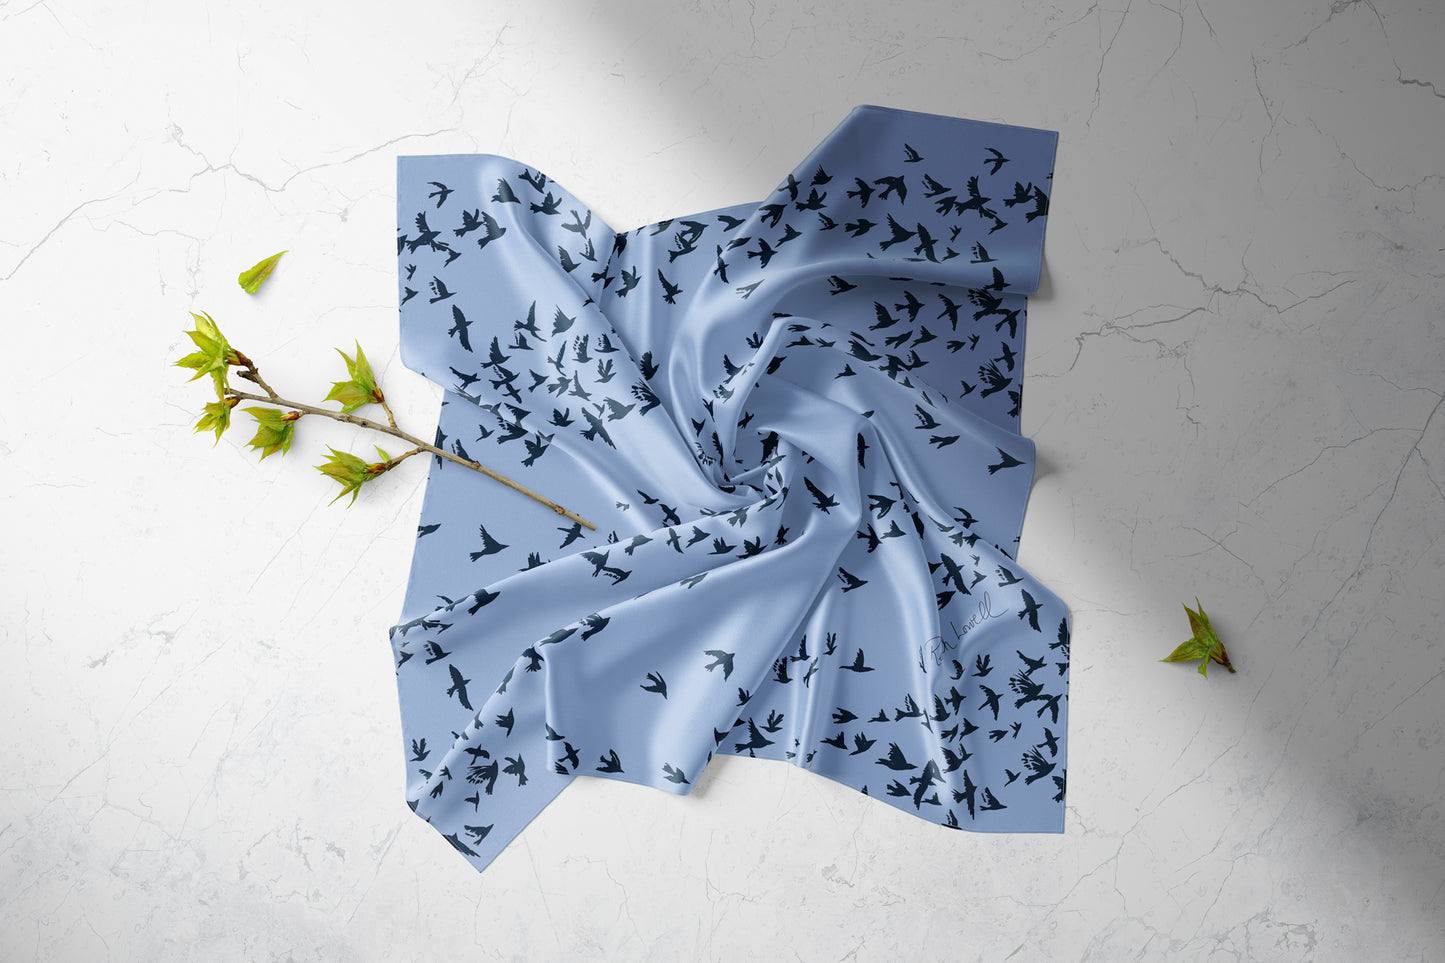 Charmeuse Square Scarf in "Fly Free" Bird Flock Migration